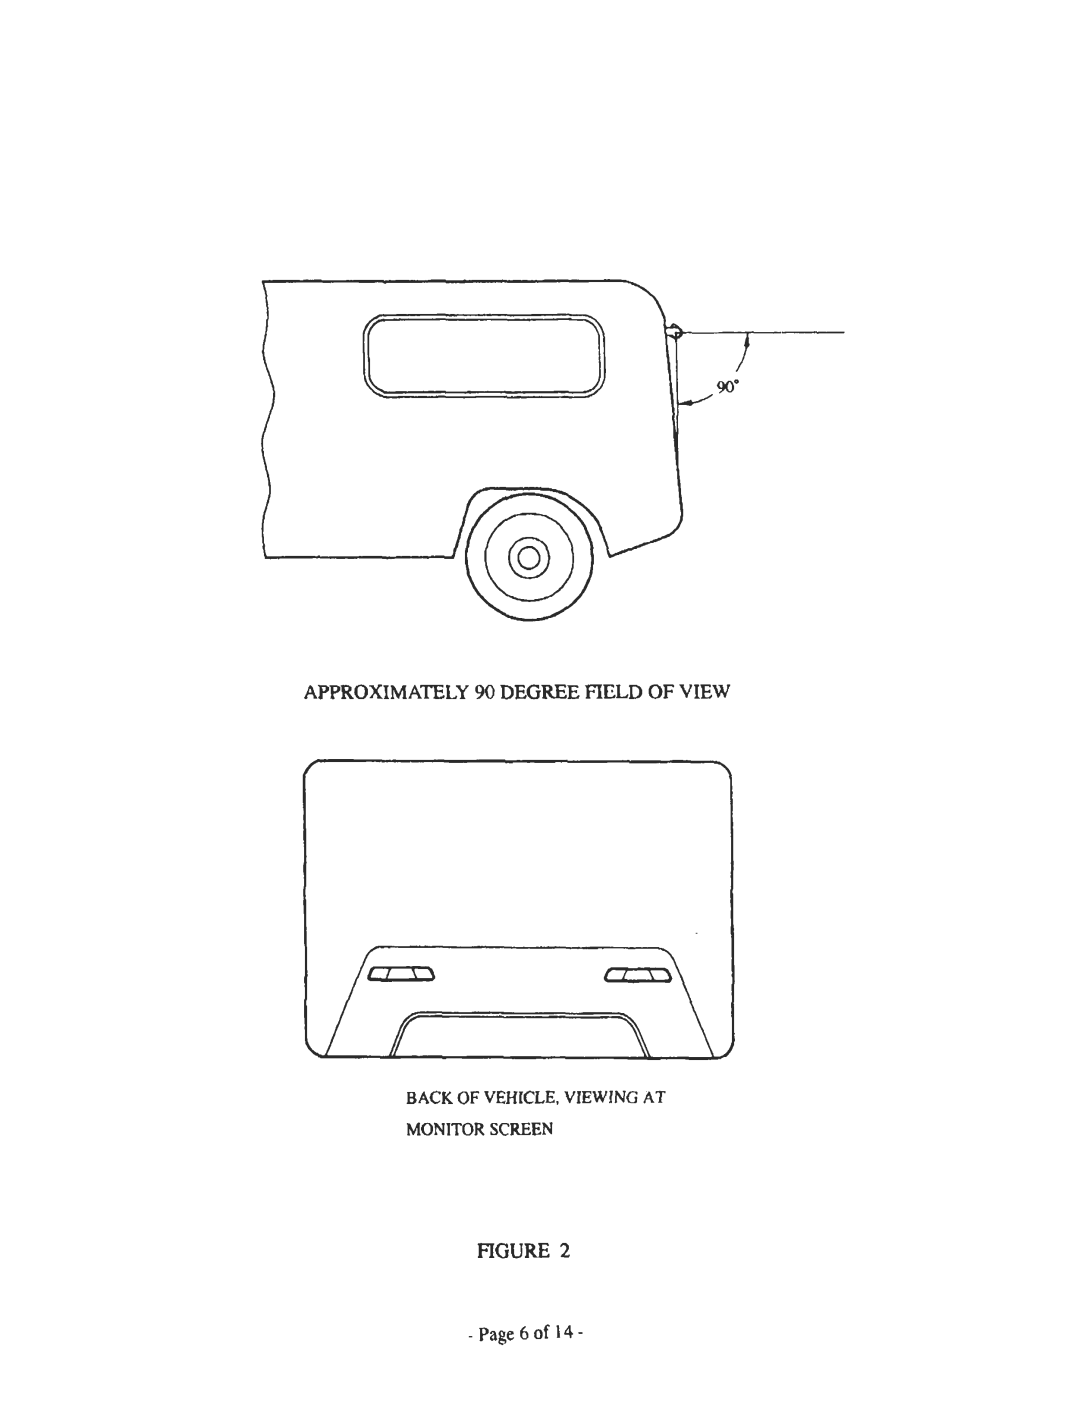 ASA Electronics AOS-33 manual APPROXIMATELY 90 DEGREE FIELD OF VIEW, Page6 of, Back Of Vehicle, Viewing At Monitor Screen 